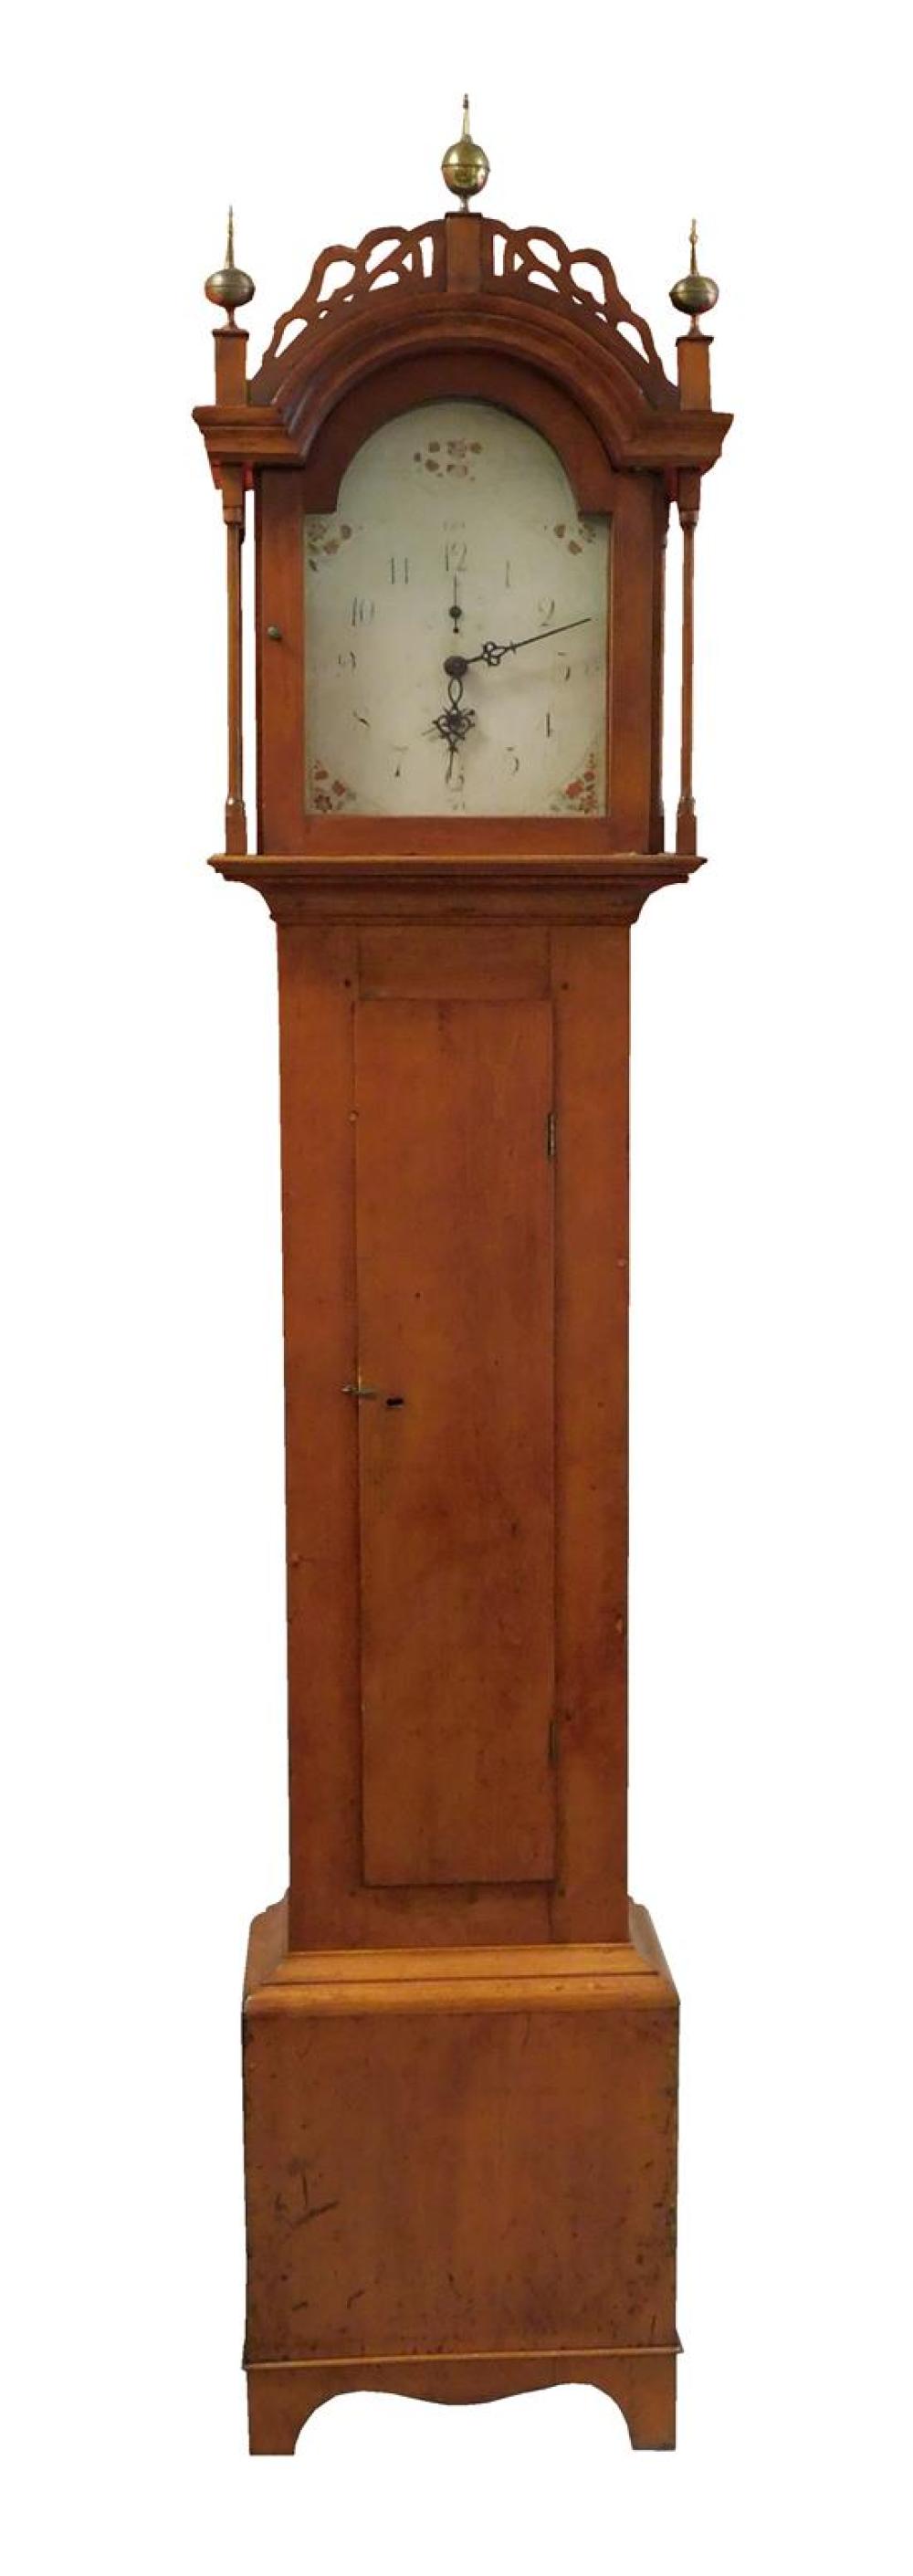 TALL CASE CLOCK, NEW ENGLAND, EARLY